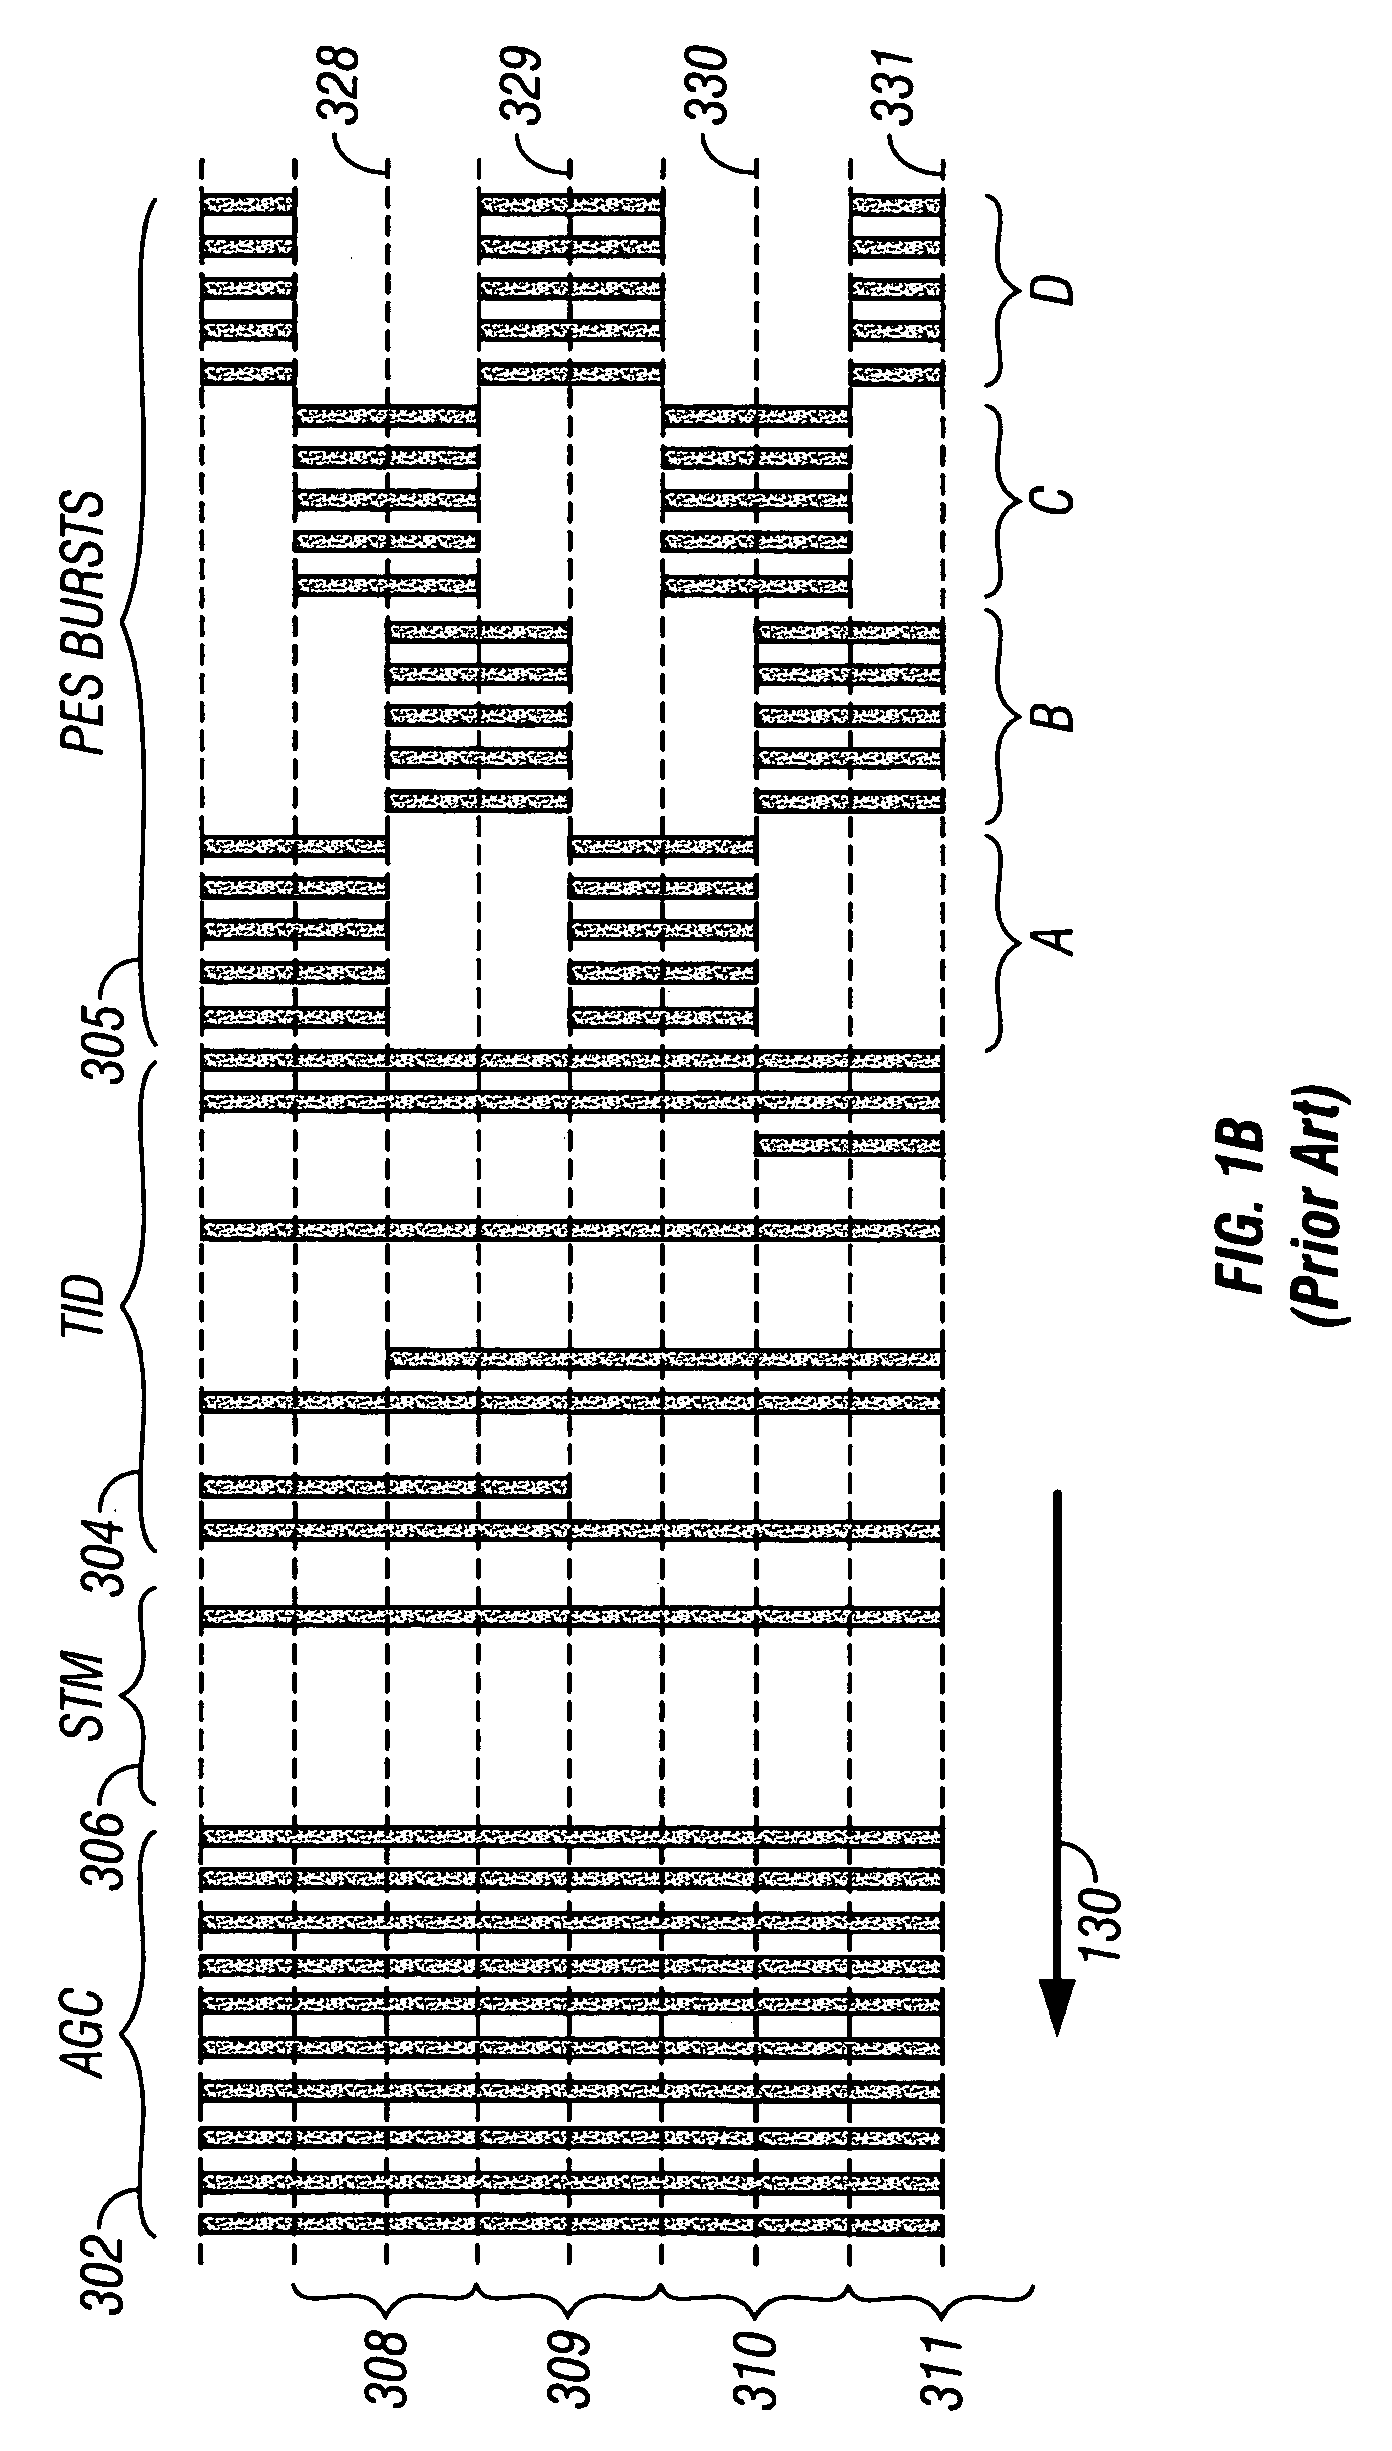 Dual-stage actuator disk drive with method for secondary-actuator failure detection and recovery while track-following